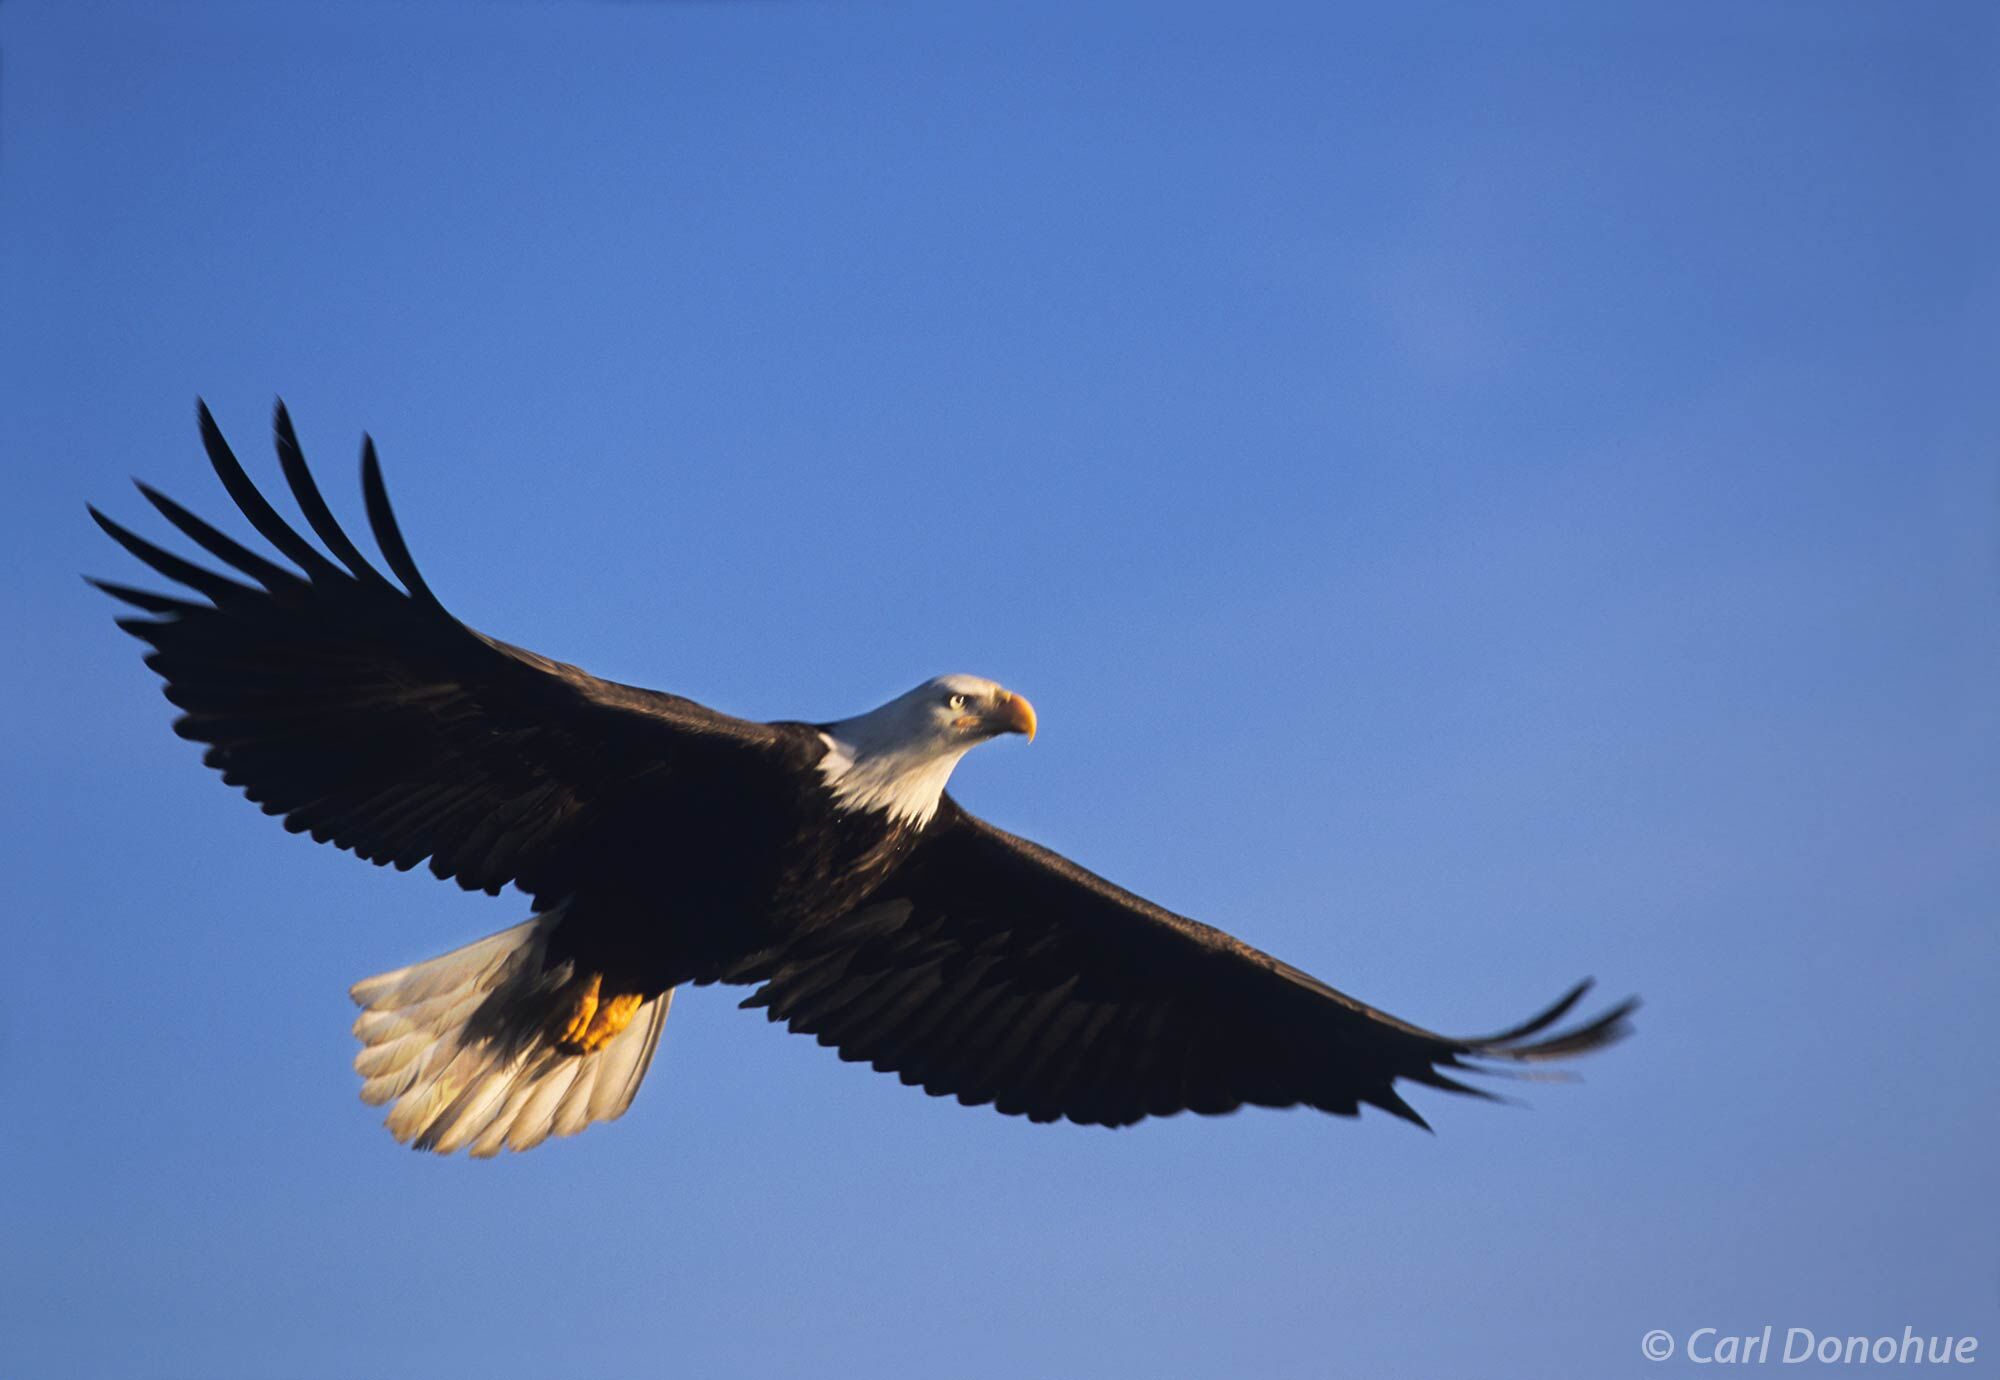 The bald eagle, seen here soaring against the deep blue Alaska sky, is an iconic symbol of the United States and a beloved species...